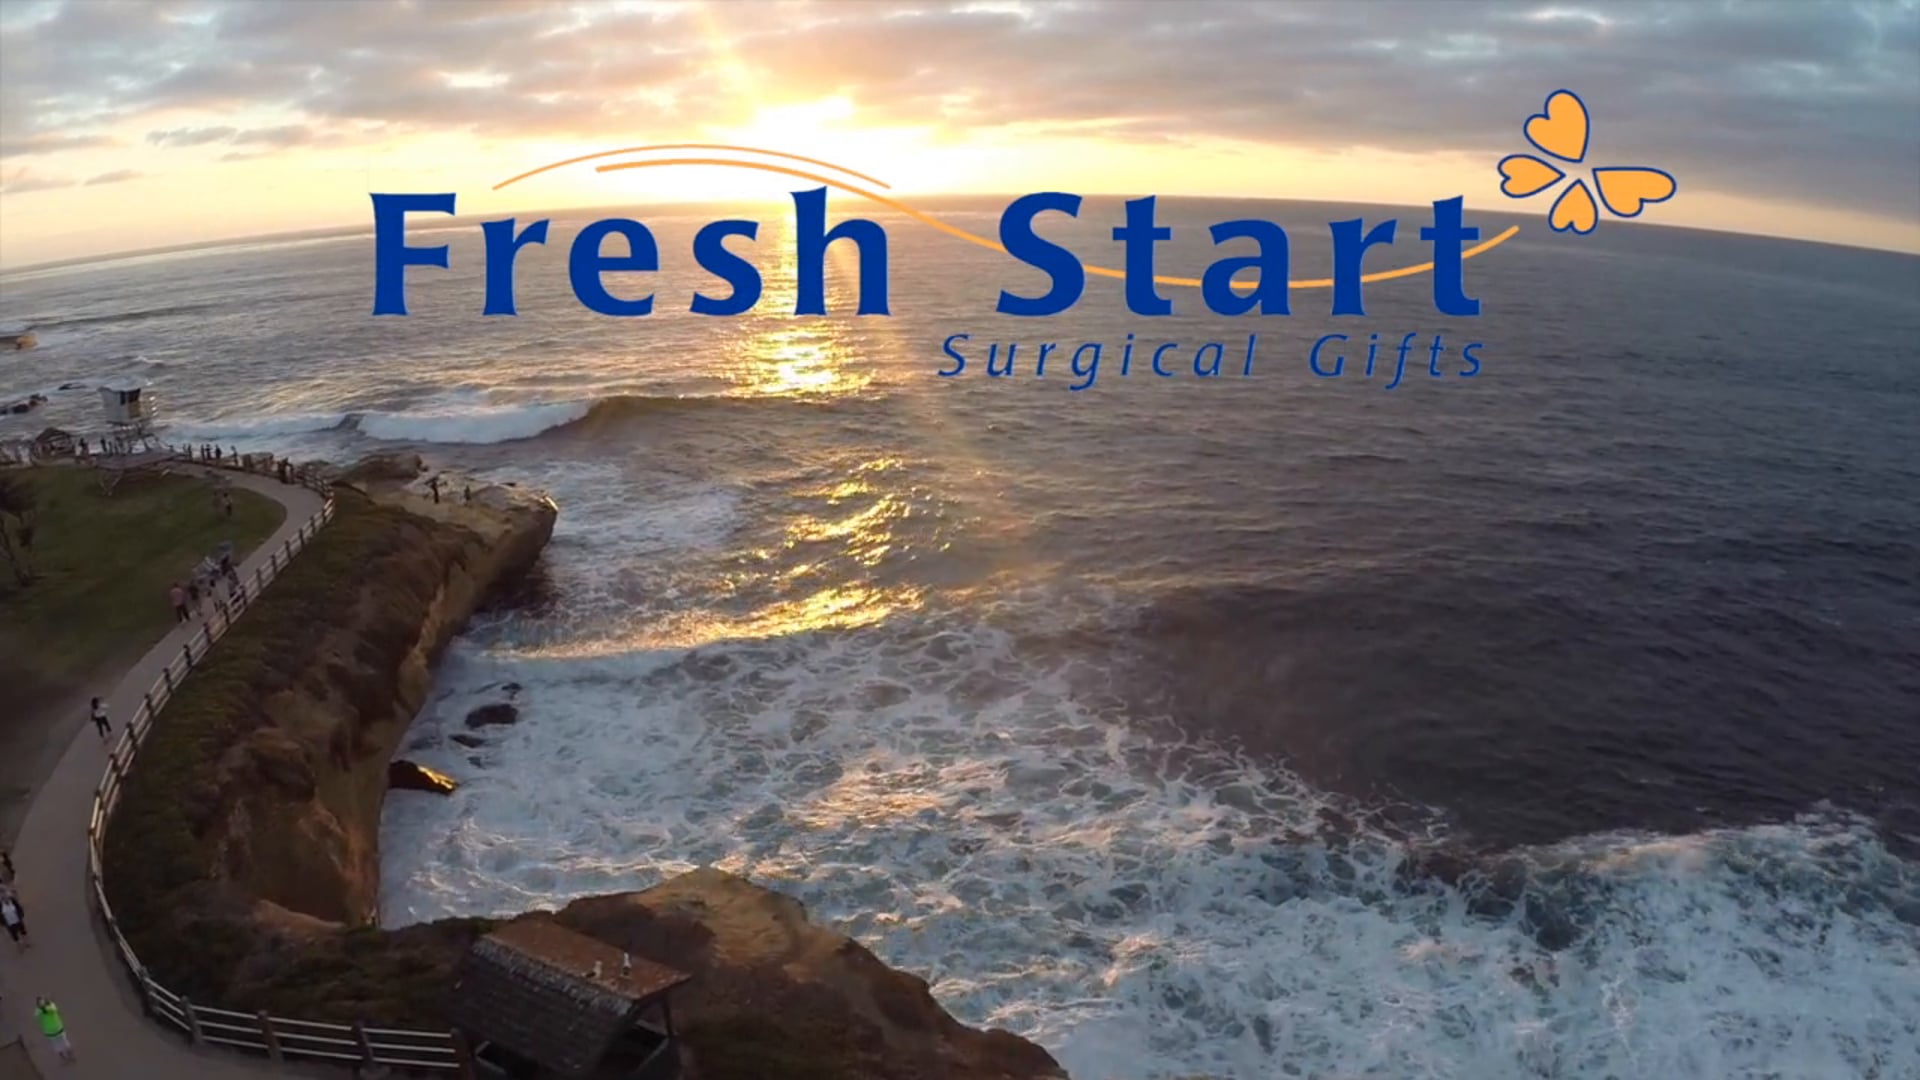 Fresh Start Surgical Gifts